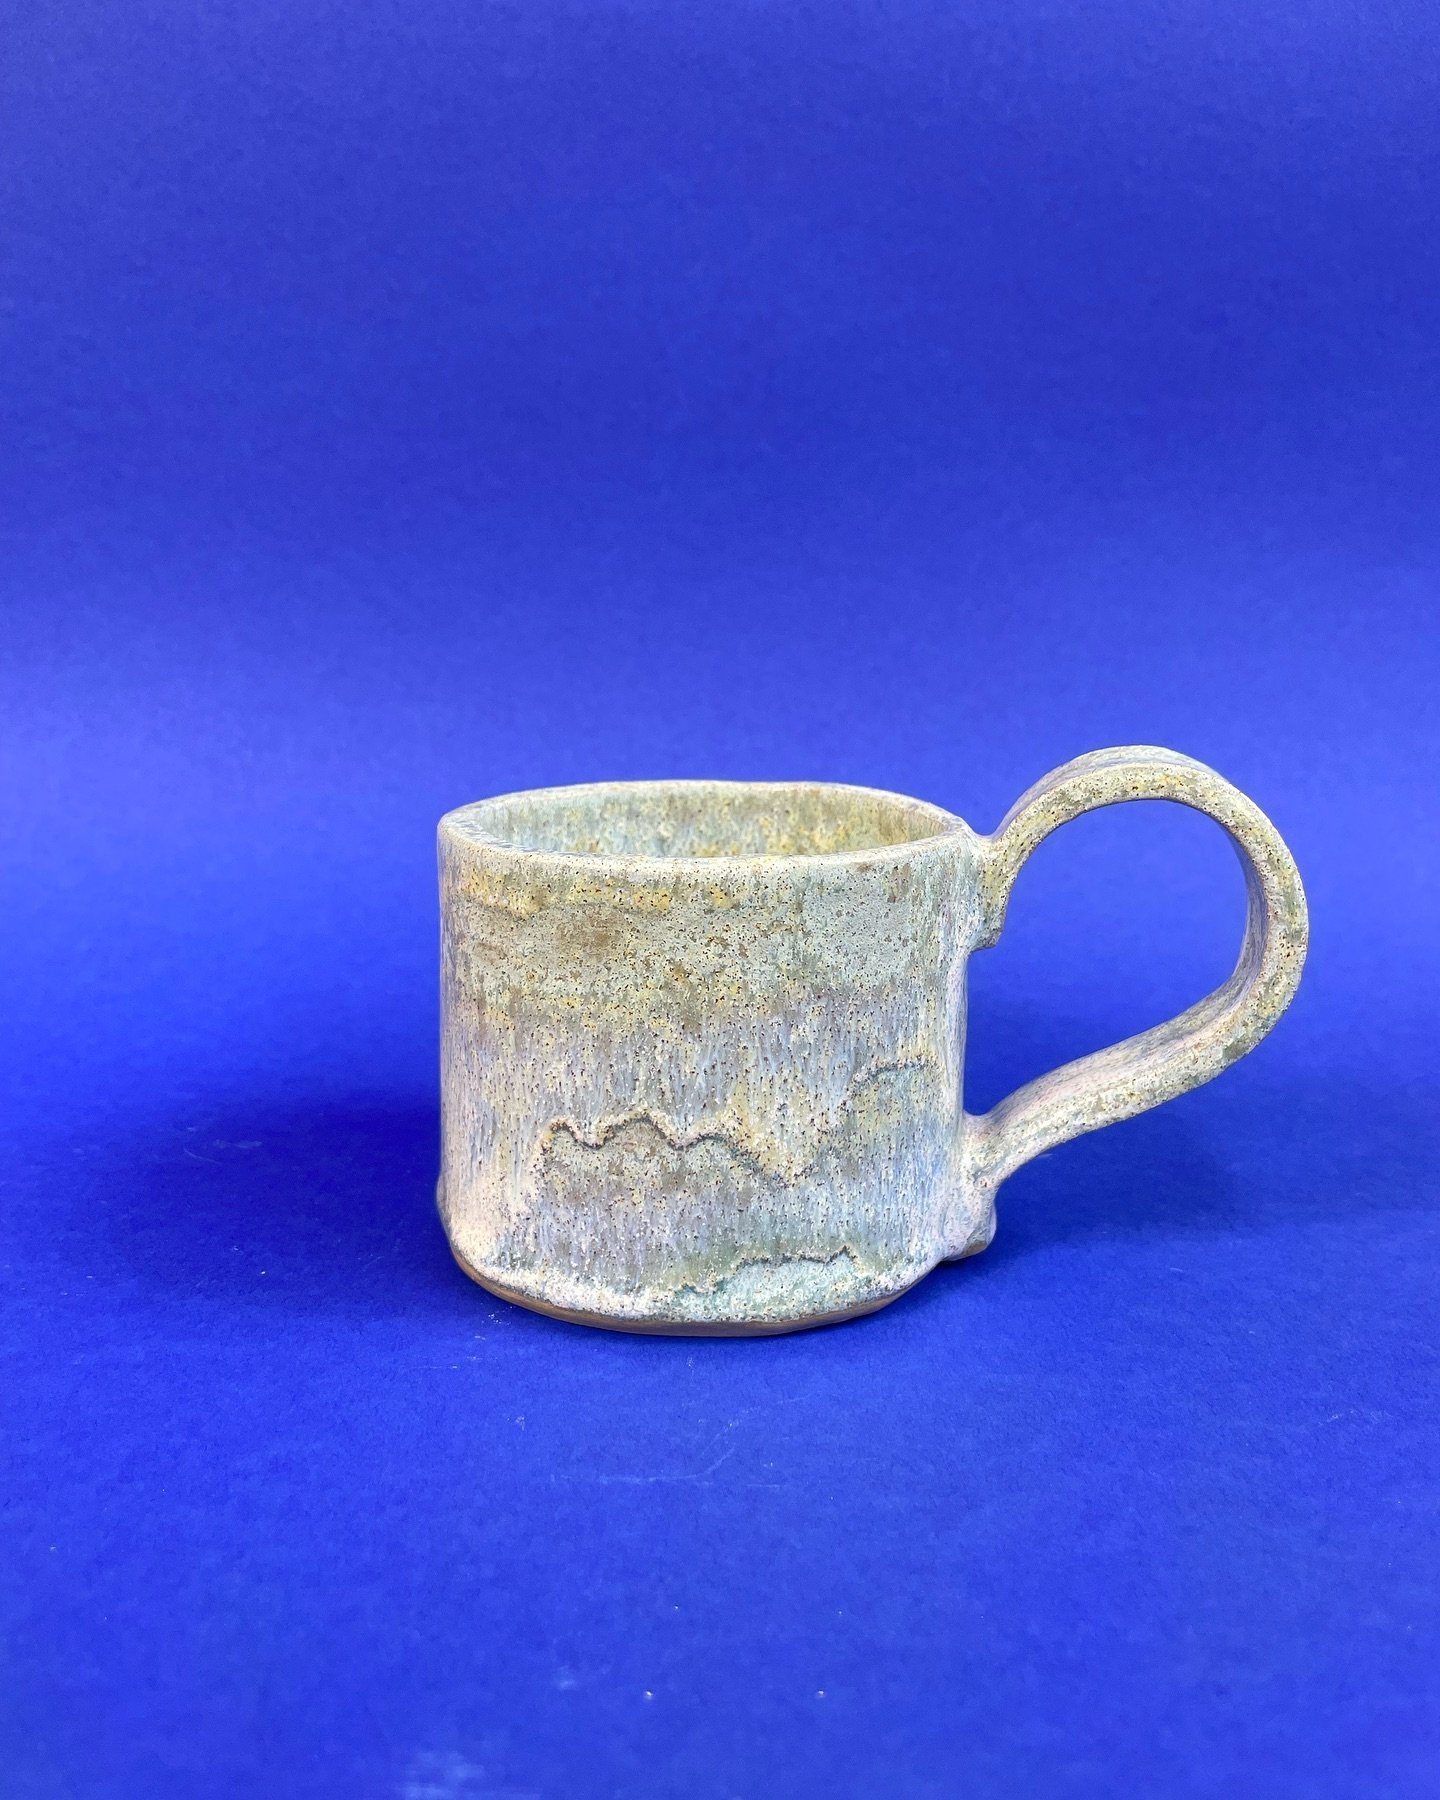 A great mug made by a student during a handbuilding intro workshop🫶🏼 we now offer quick intros for you to be able to make your mug in one evening 🌻🍾 if you wanna sign up check our link in bio ! 

#ceramicworkshop #keramikwerkstatt #t&ouml;pfernma